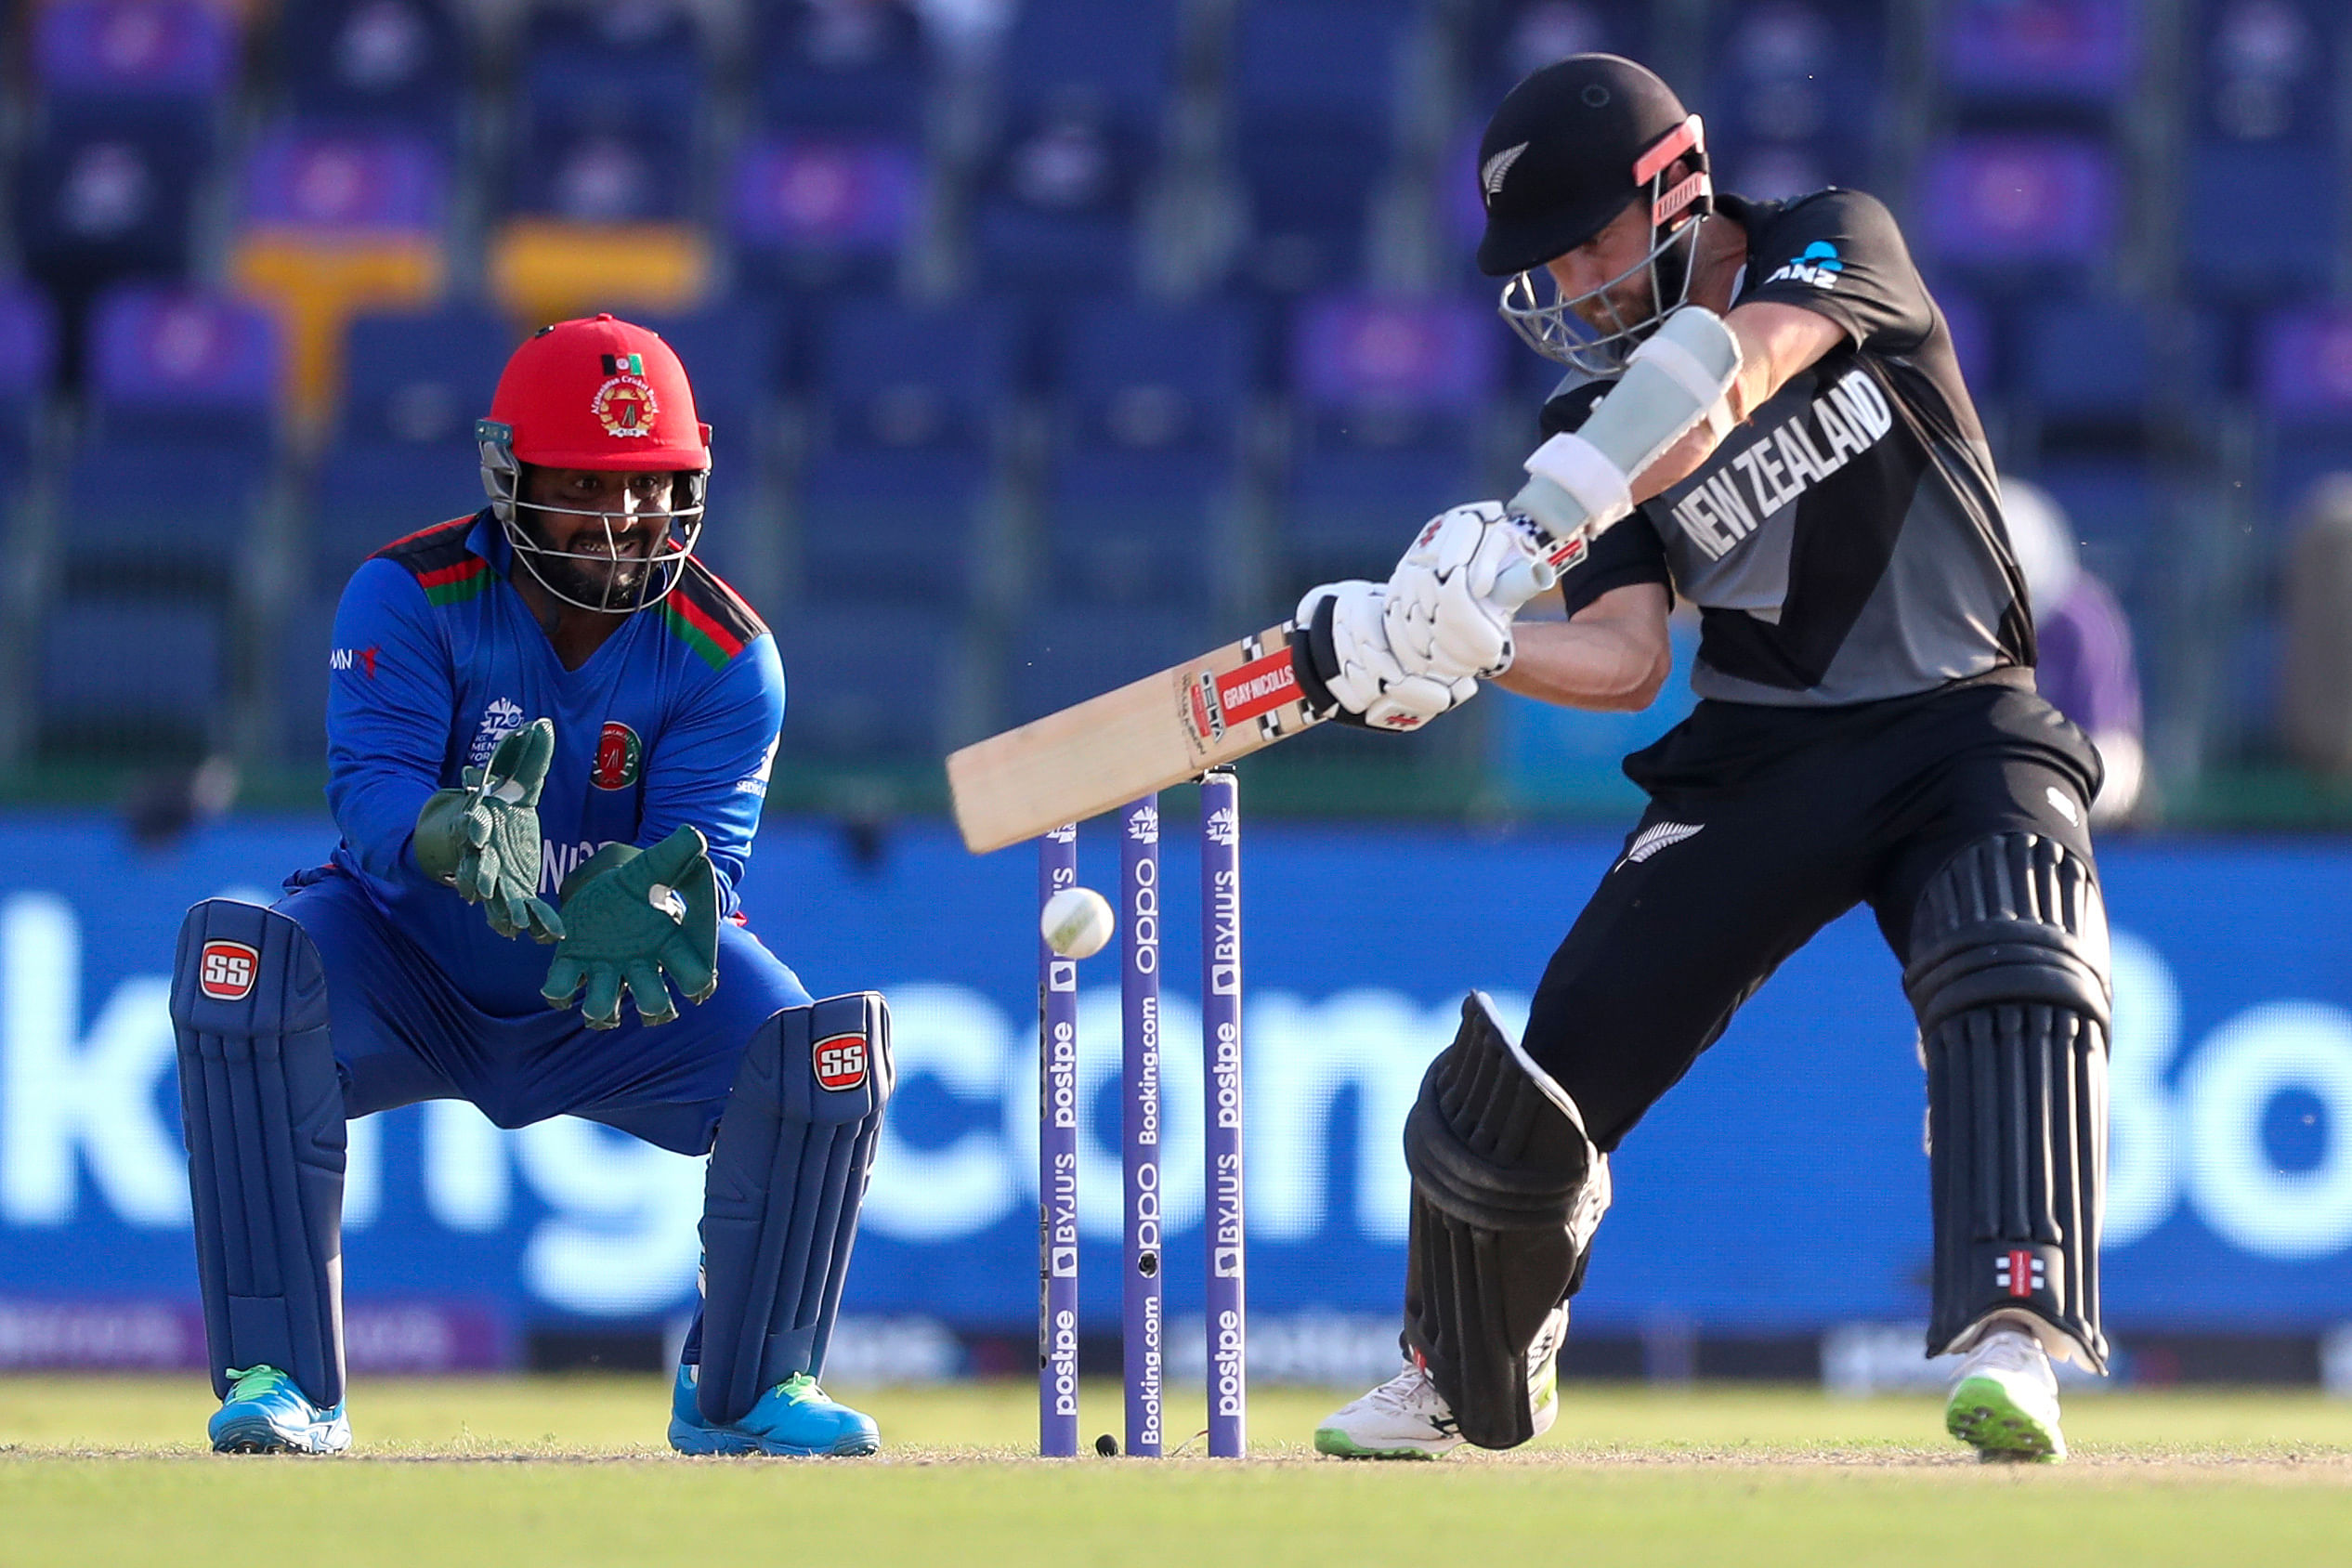 New Zealand's captain Kane Williamson bats during the Cricket Twenty20 World Cup match between New Zealand and Afghanistan in Abu Dhabi. Credit: AP Photo